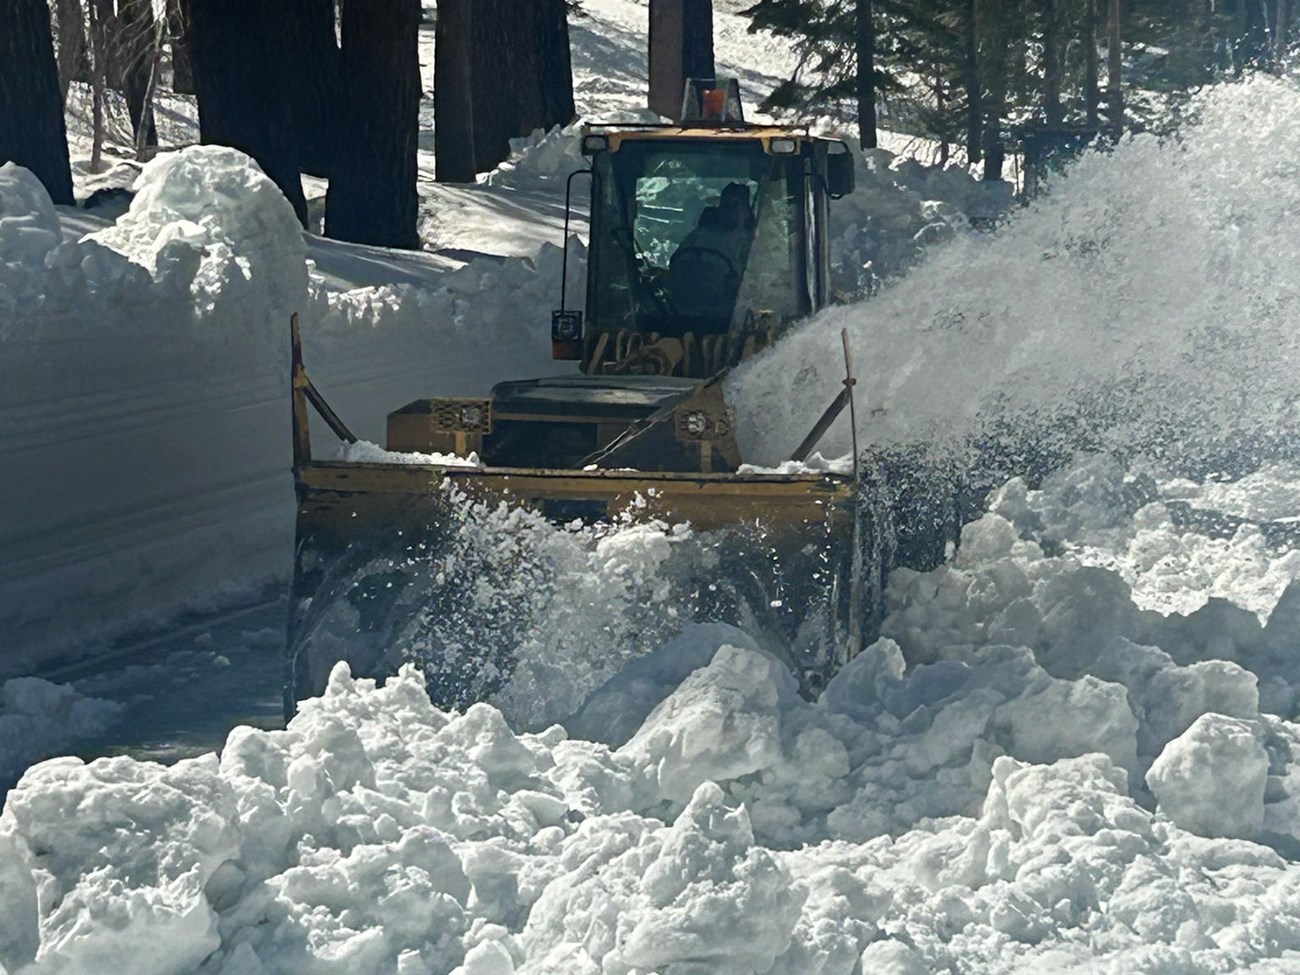 A snow blower driving on Tioga Road, blowing snow that is several feet deep off the road